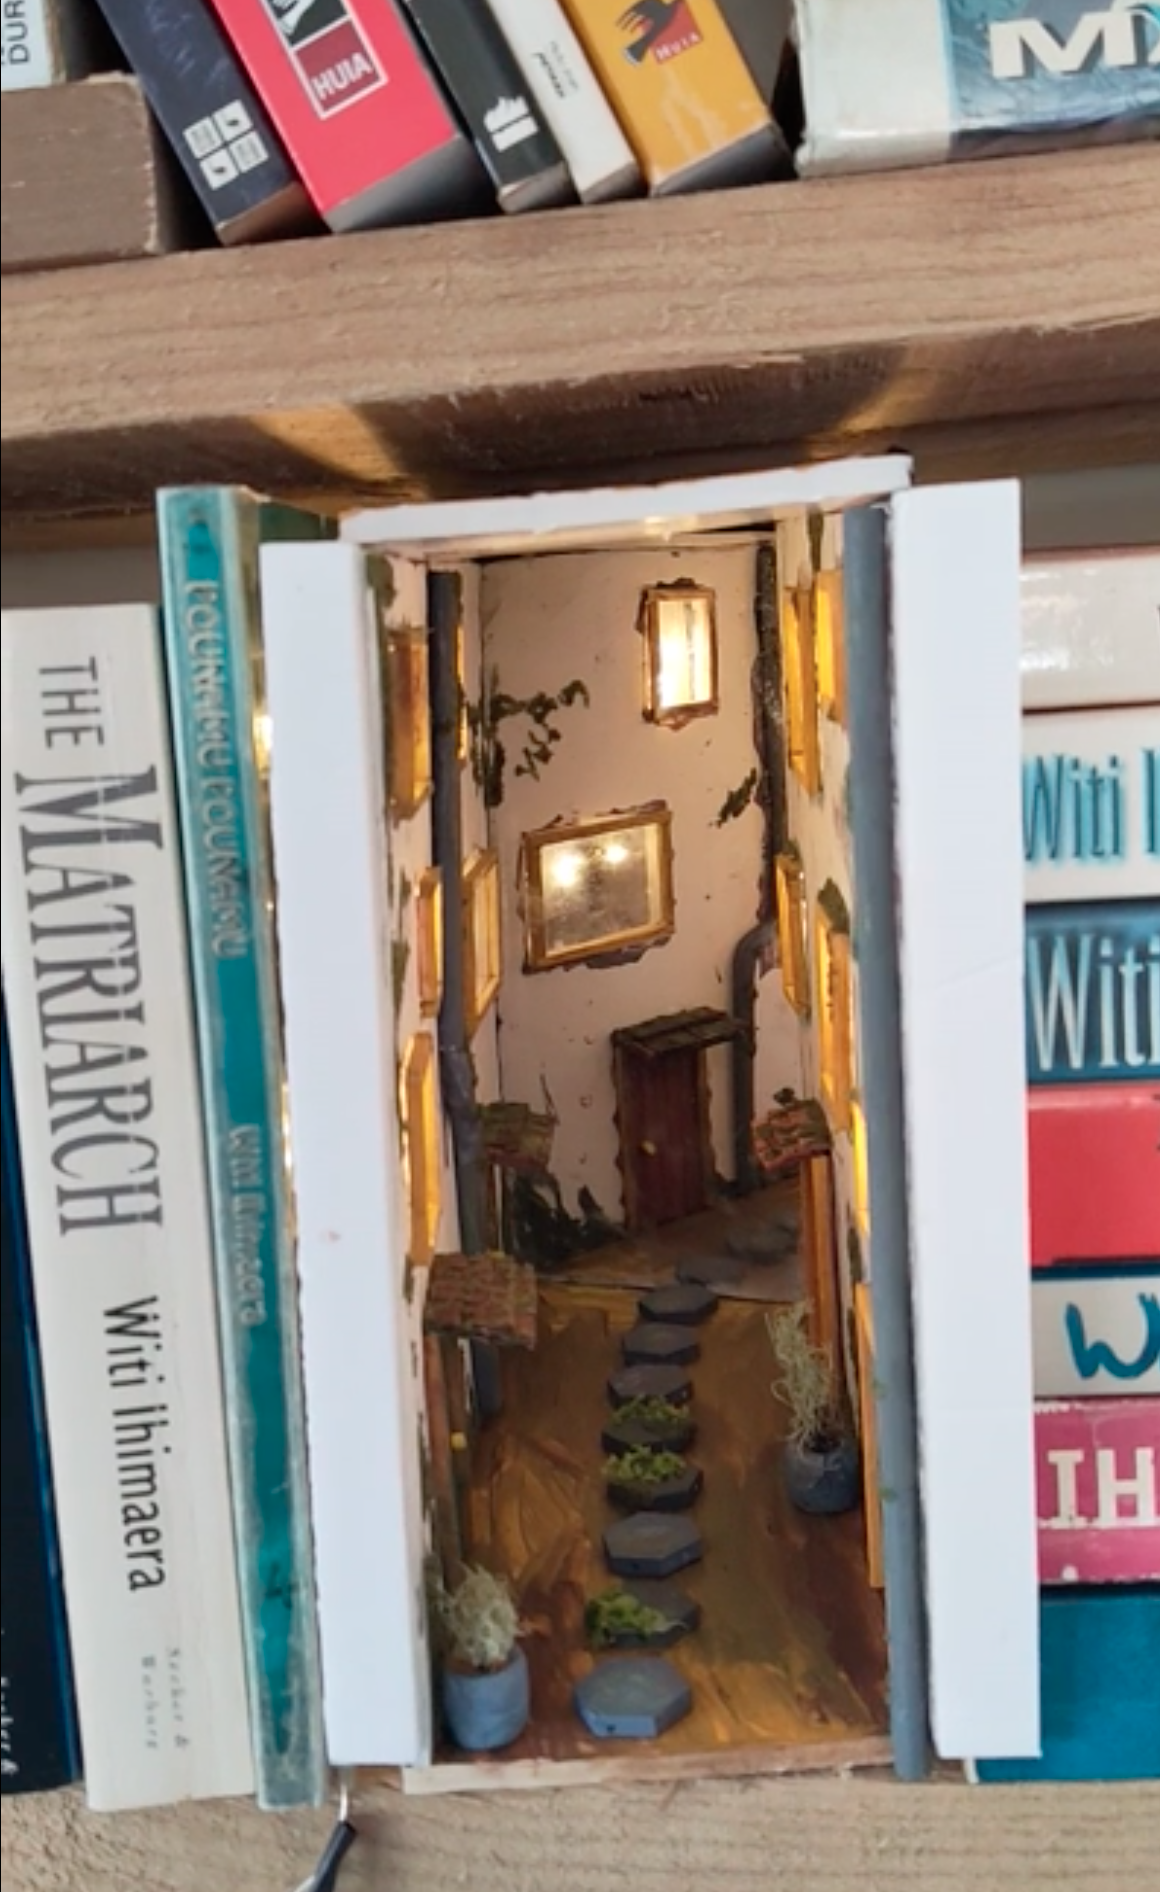 15 Book Nook Shelf Inserts That'll Make You Want To Create One Of Your Own